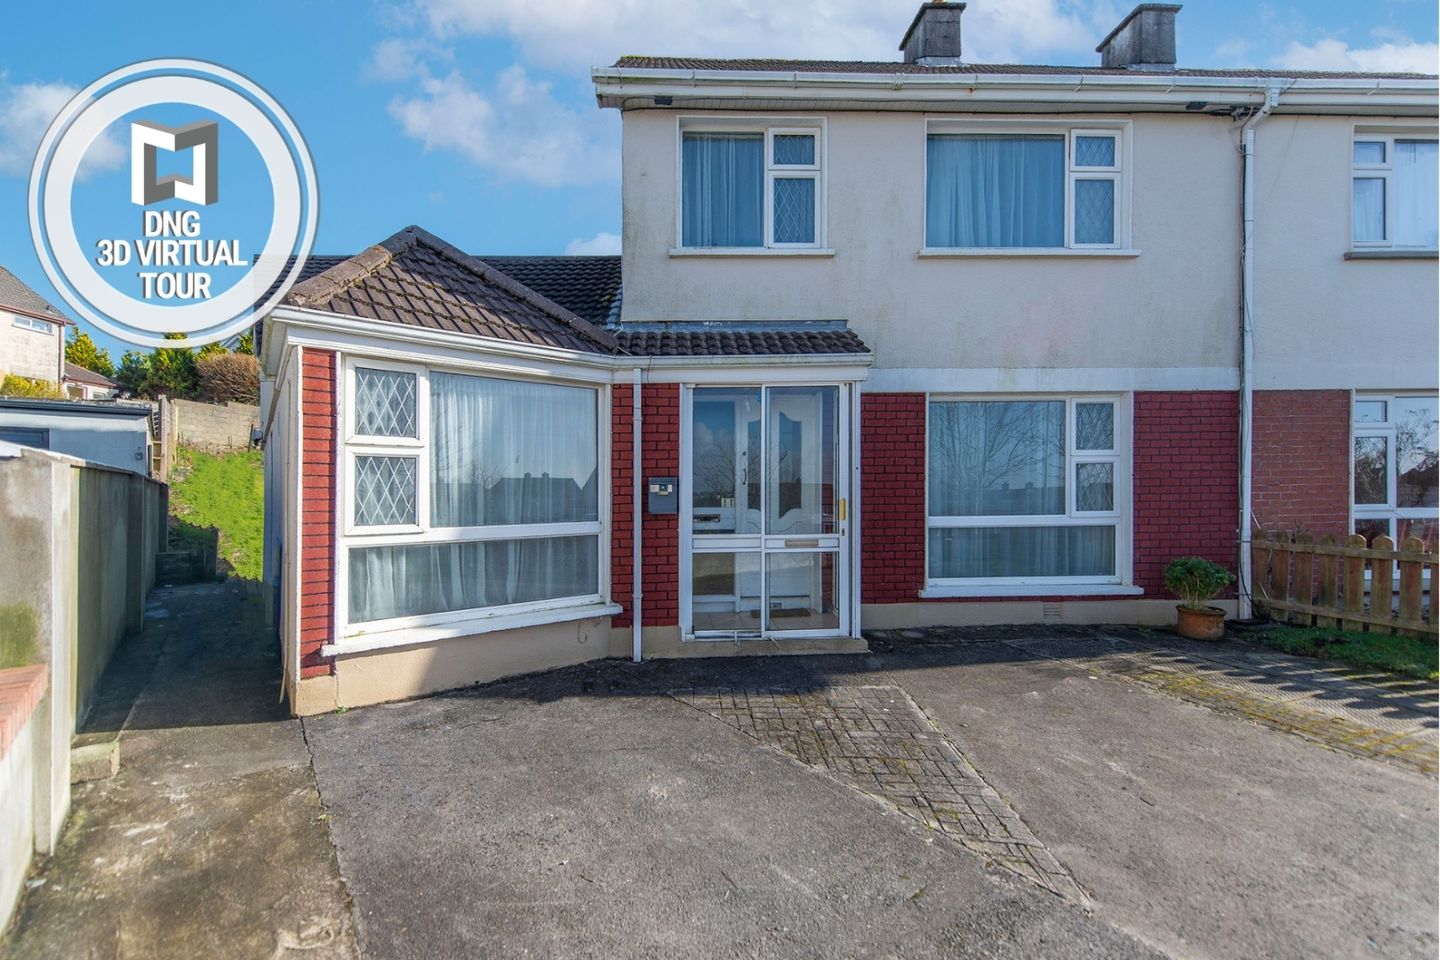 11 Renmore Crescent, Renmore, Co. Galway, H91Y337